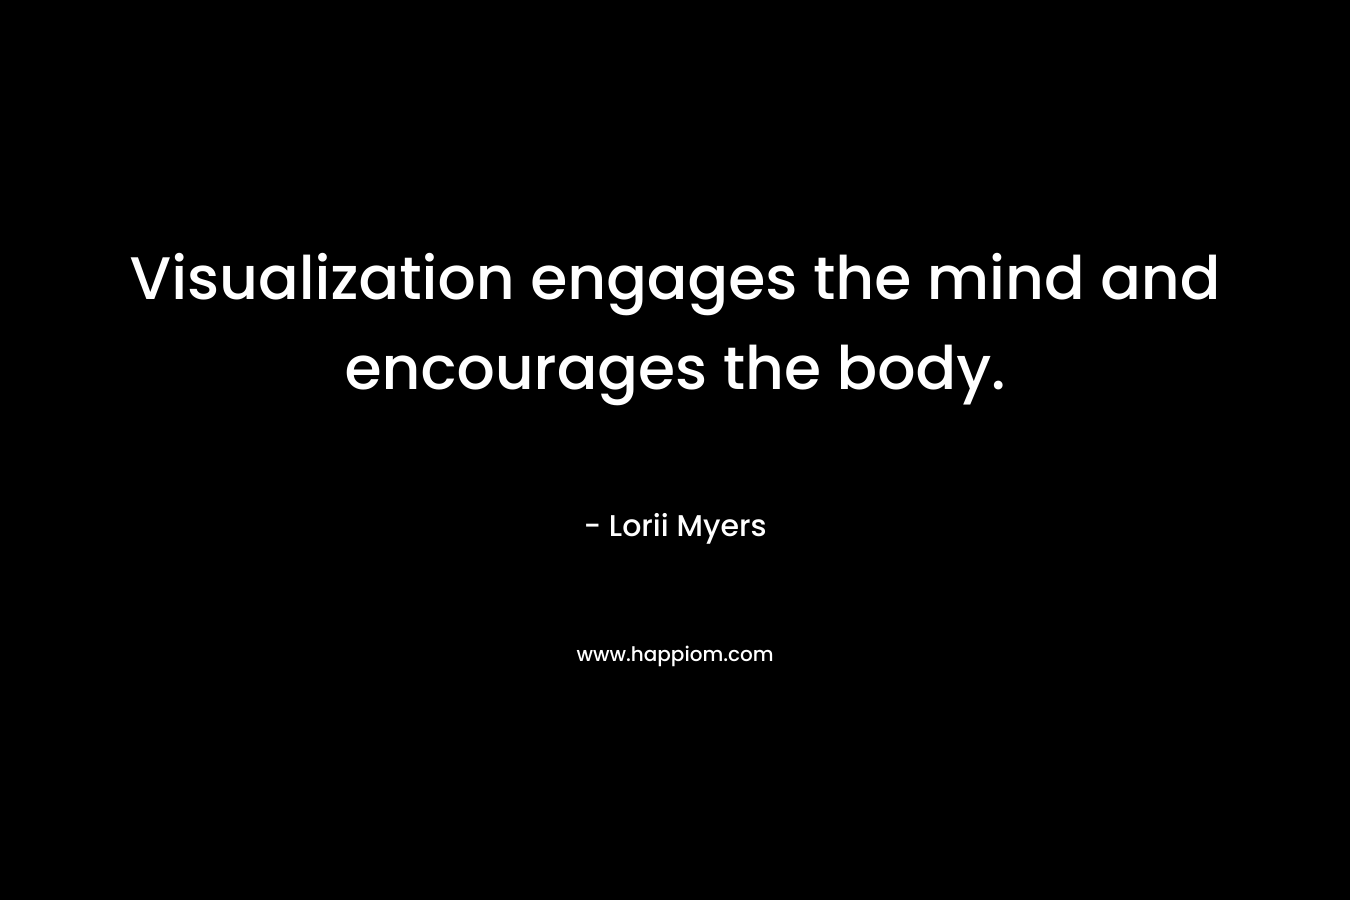 Visualization engages the mind and encourages the body.